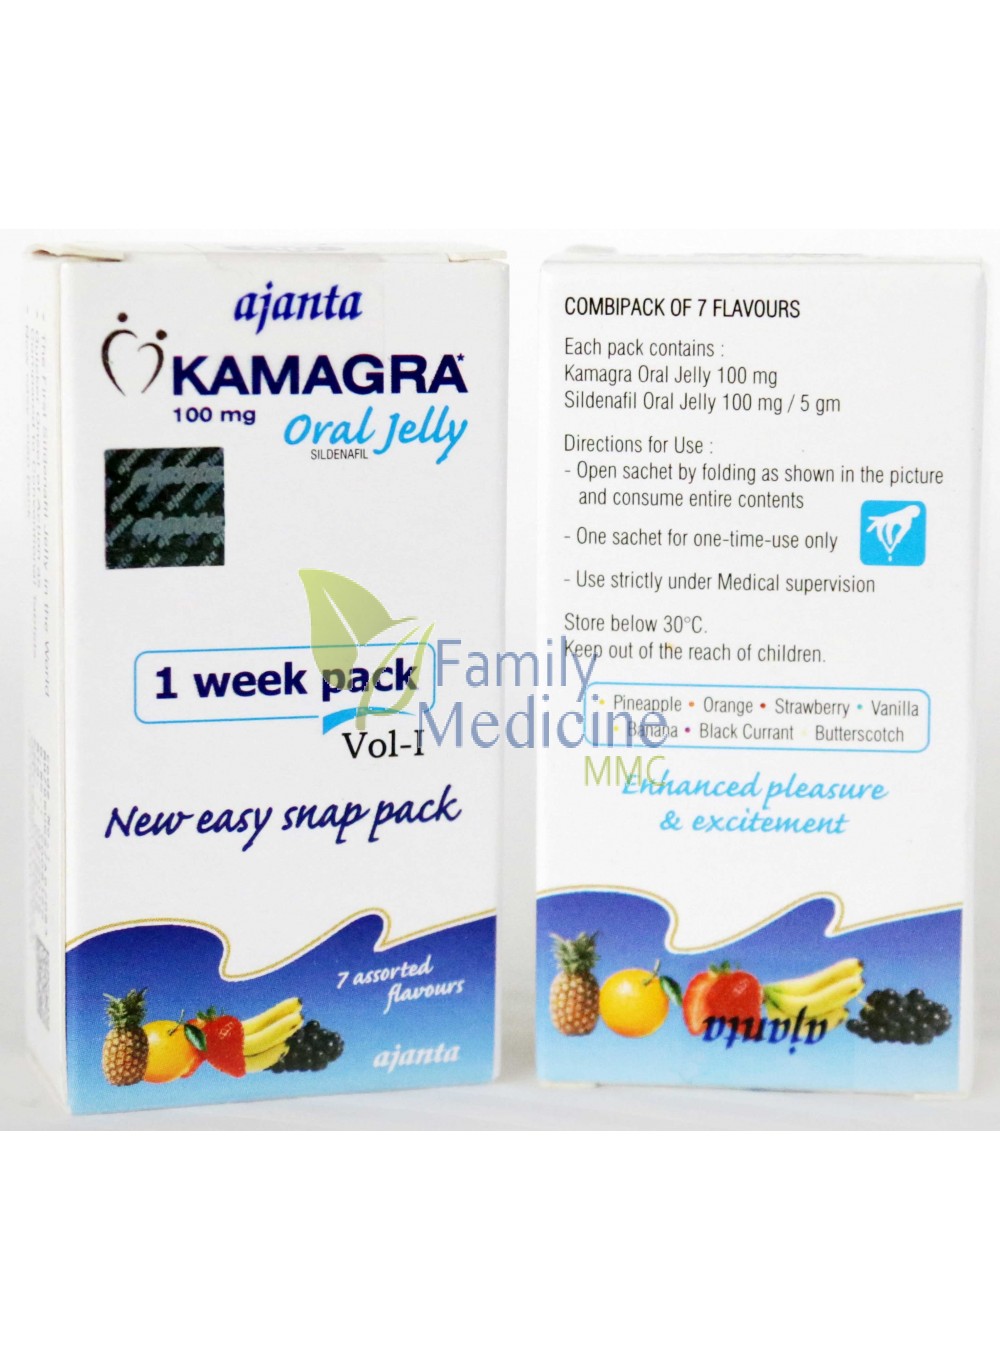 Buy Kamagra Oral Jelly (Sildenafil Citrate) 100mg